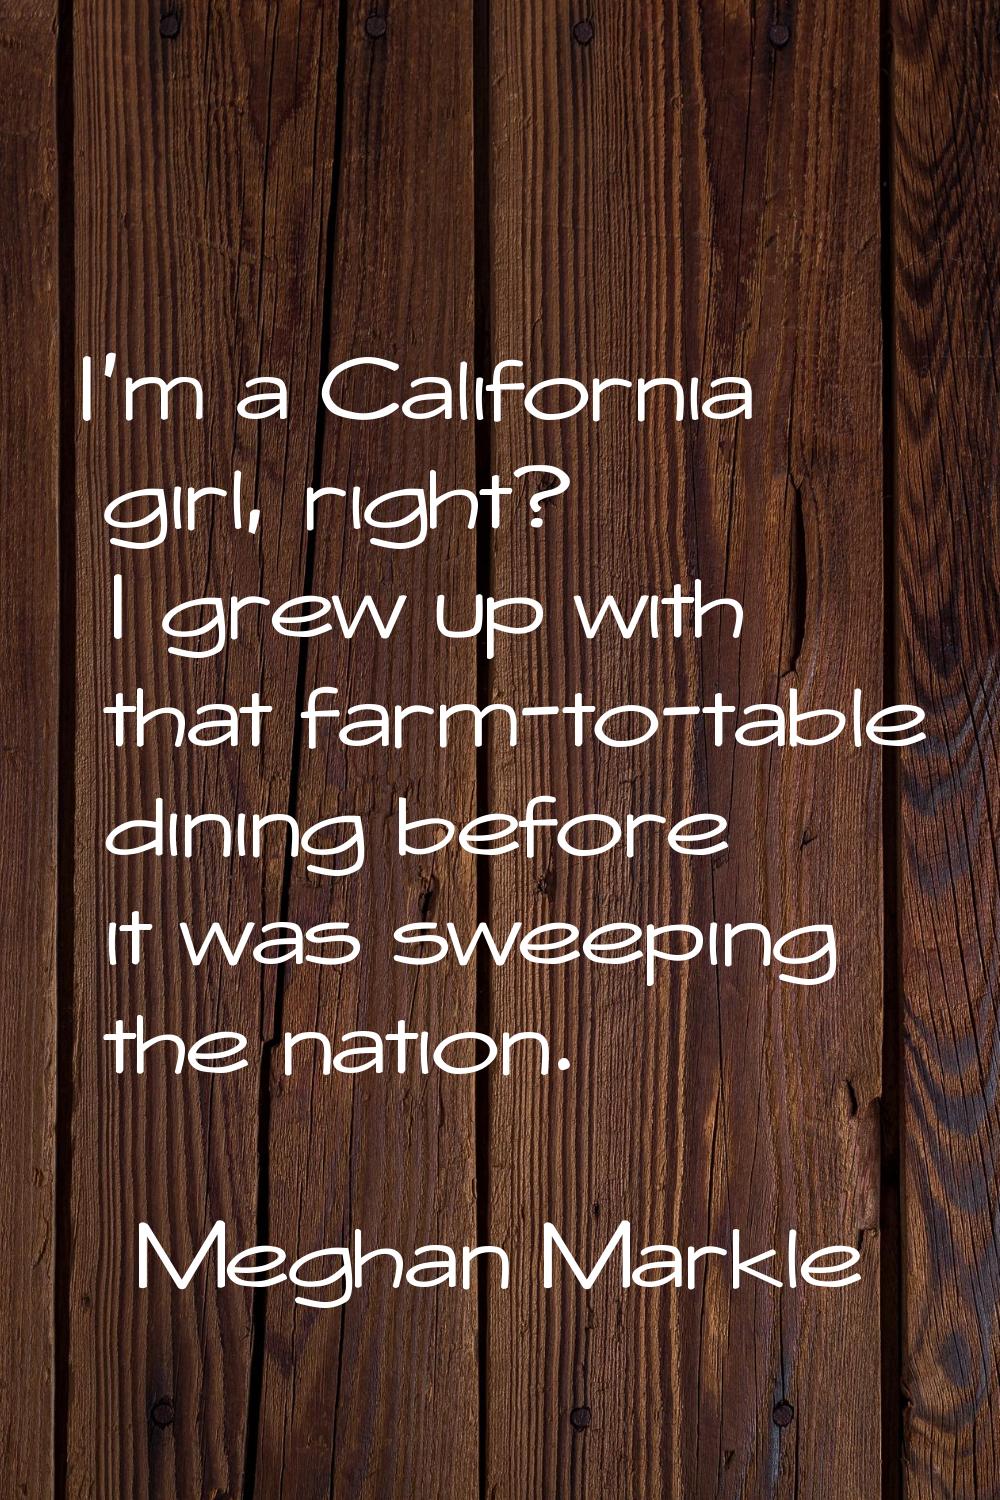 I'm a California girl, right? I grew up with that farm-to-table dining before it was sweeping the n